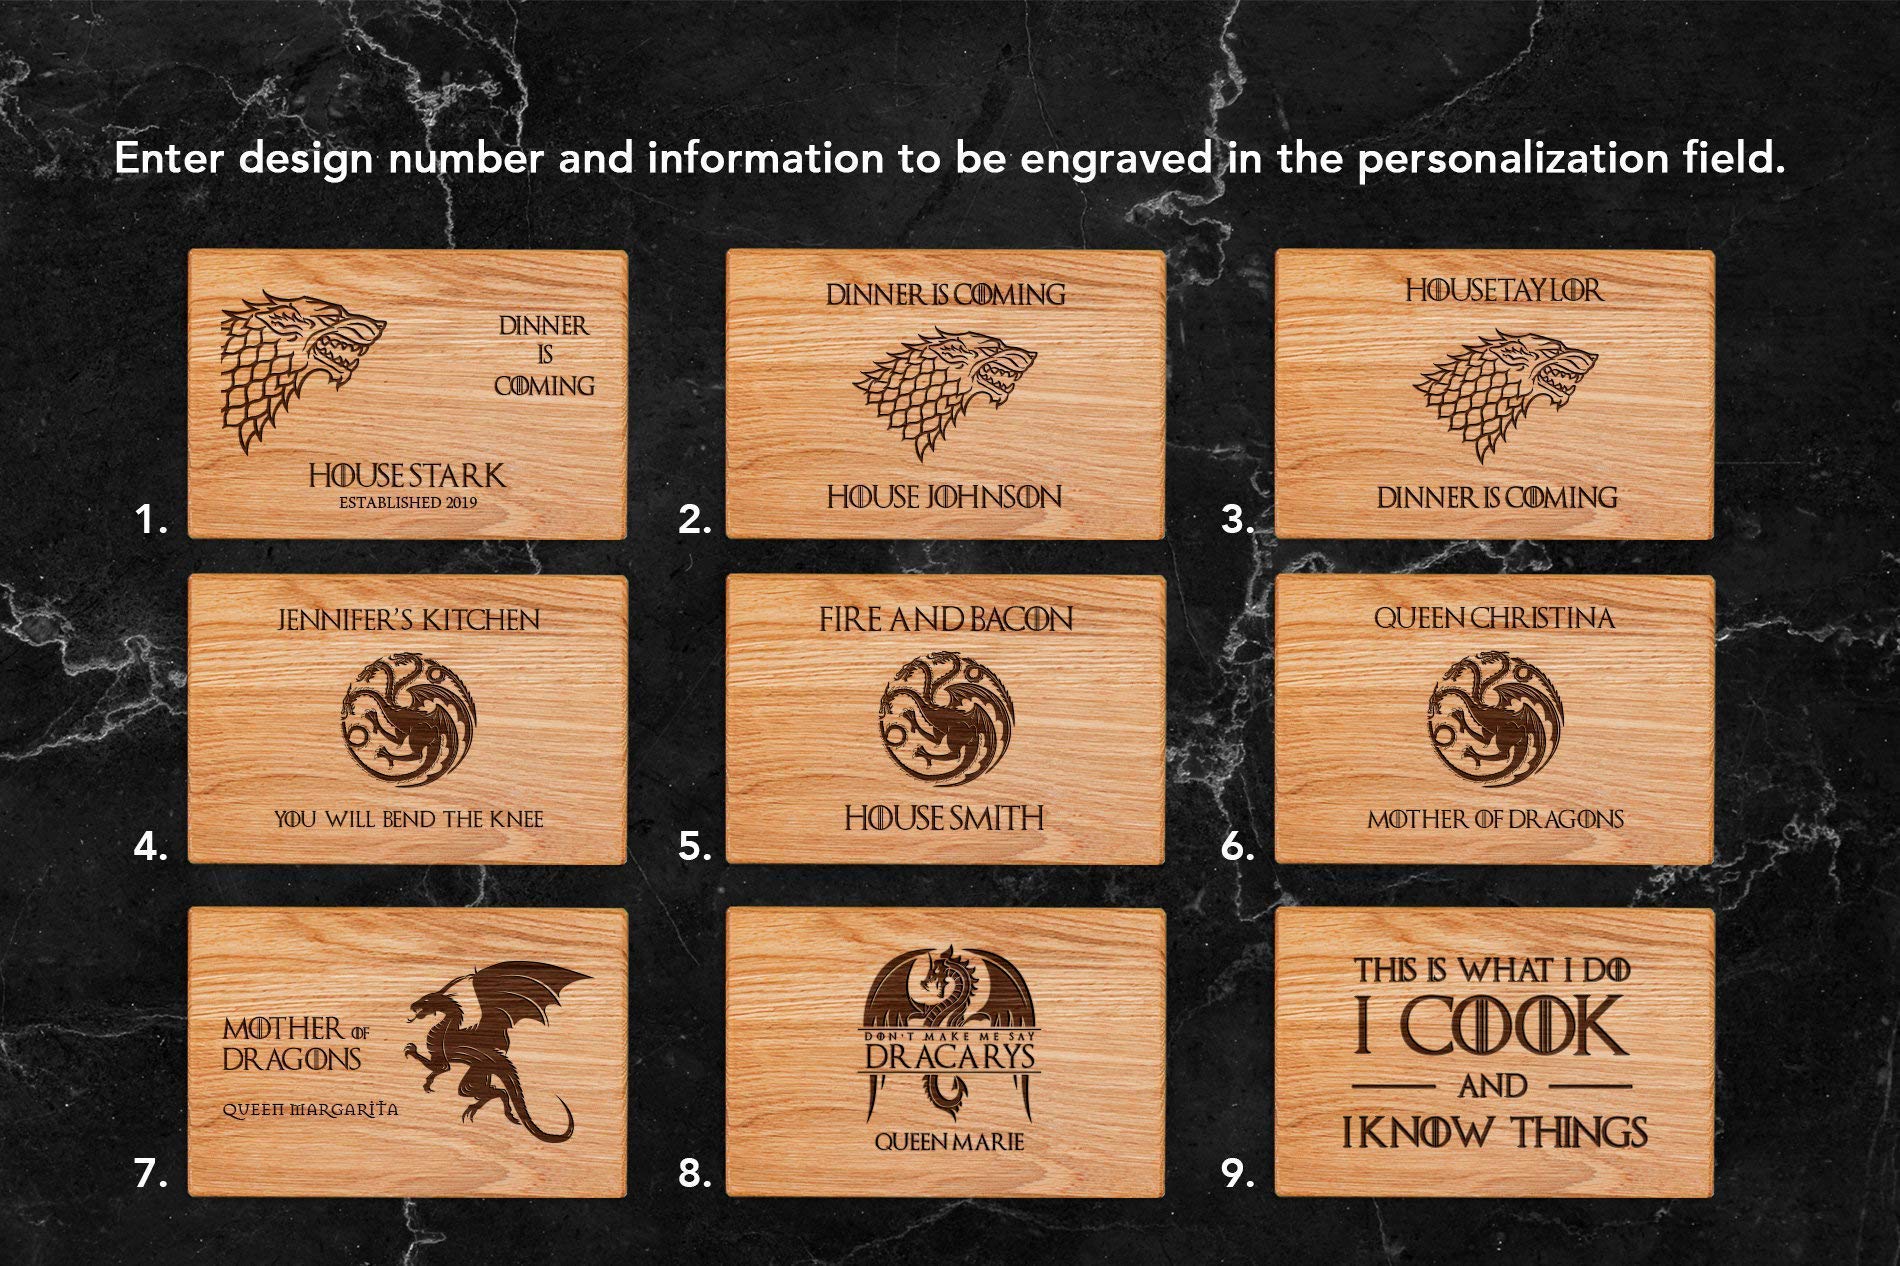 Dinner is coming Games of thrones House Targaryen Personalized Engraved Cutting Board Custom Family chopping Wedding Gift Anniversary Mother's day gift Birthday game03